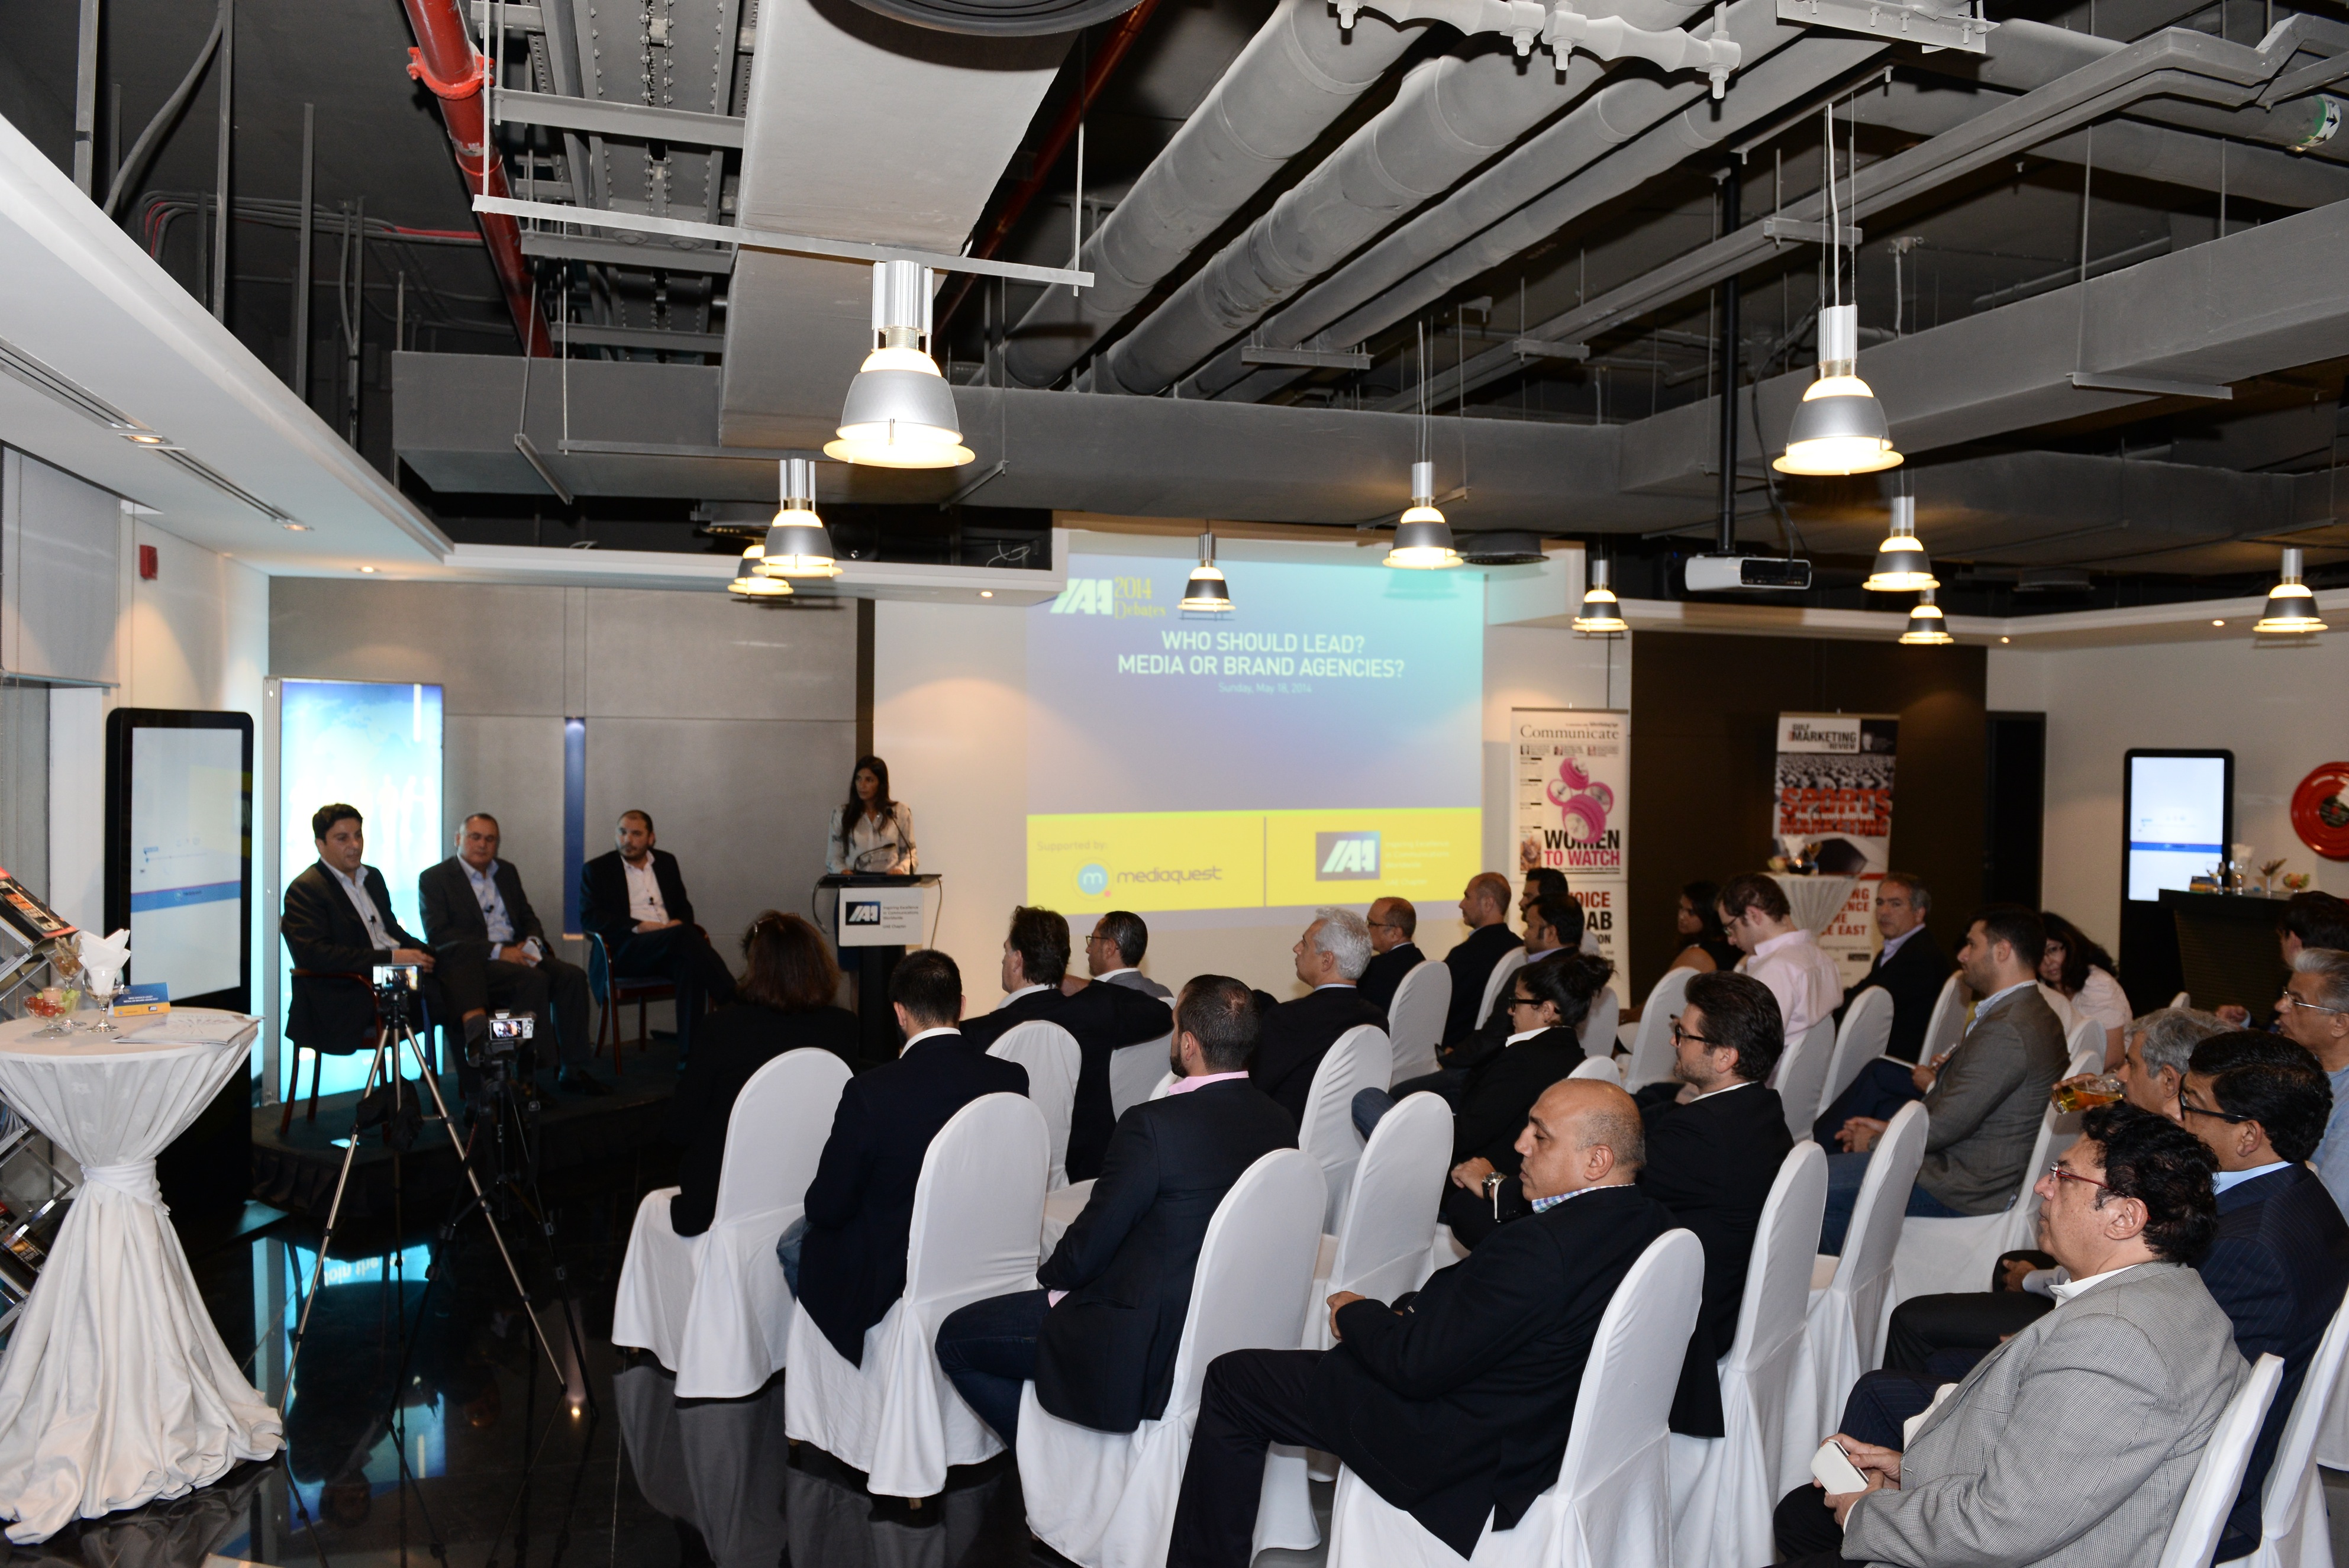 The IAA UAE chapter holds second session of its debates series